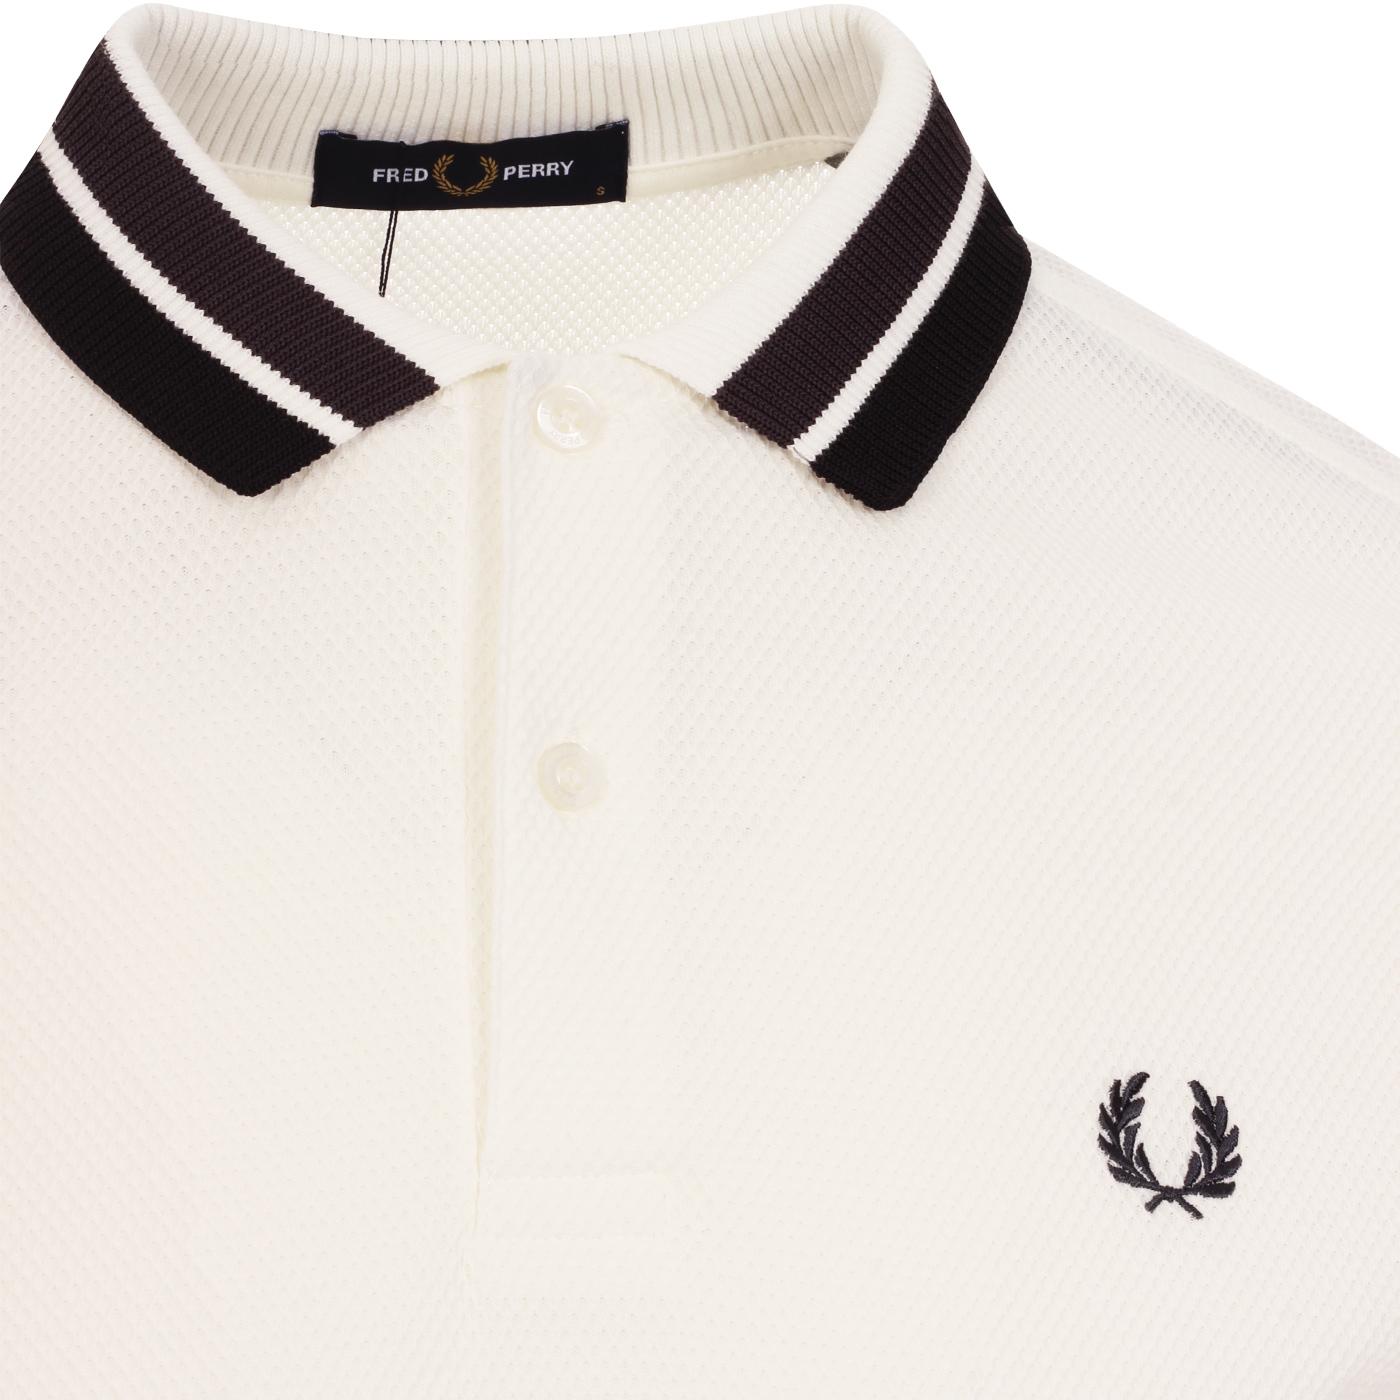 FRED PERRY Retro Mod Bold Tipped Textured Polo Top White